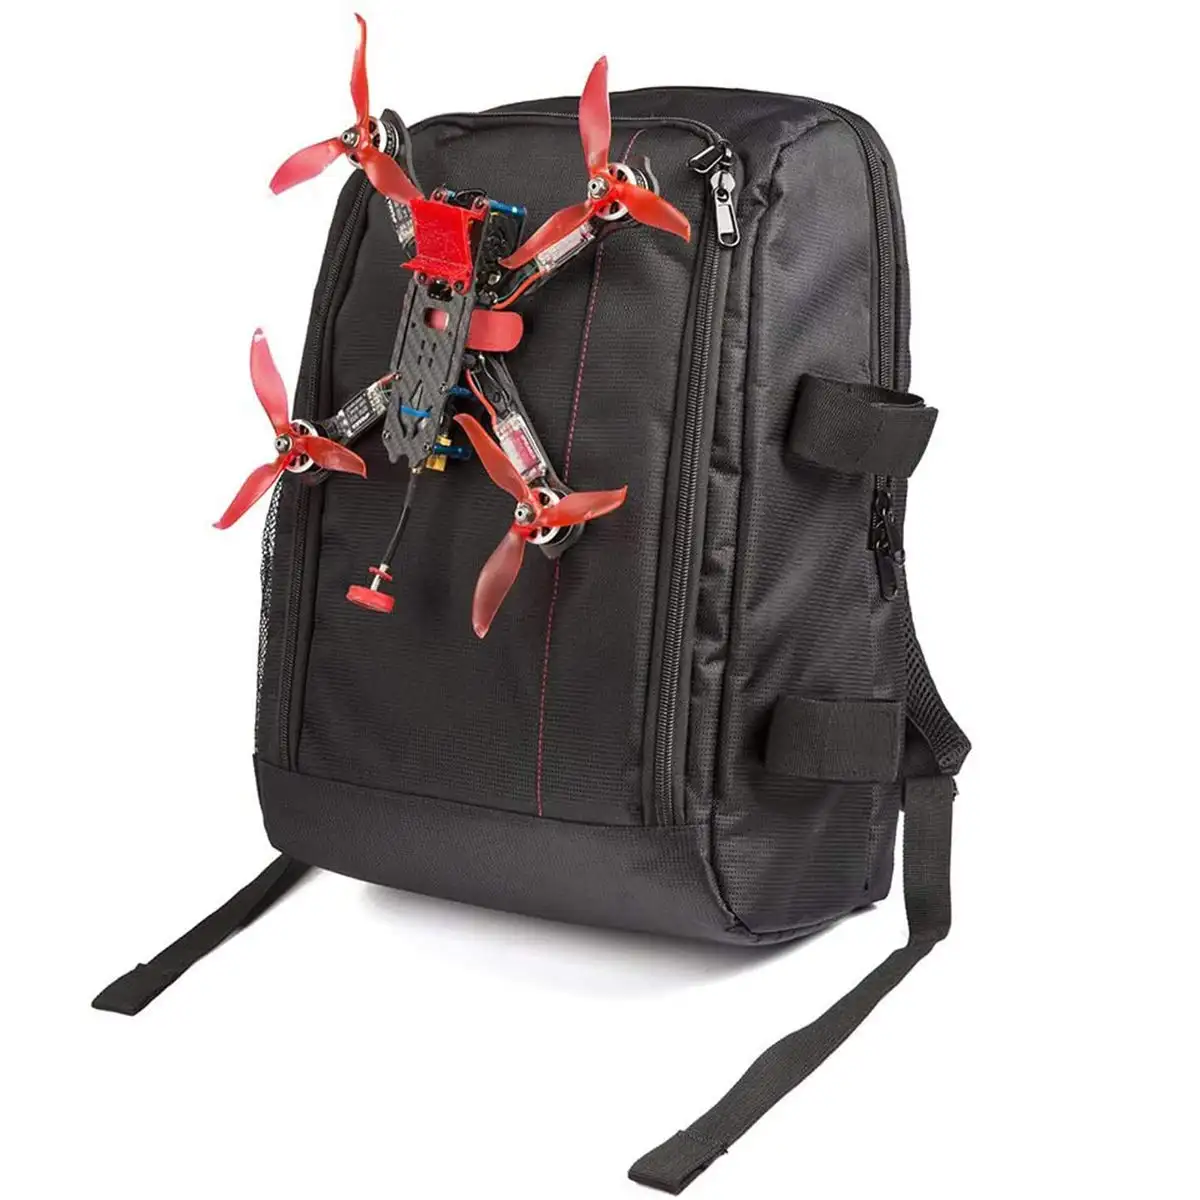 Waterproof Carrying Case Bag RC Plane Fixed Wing FPV Racing Drone Backpack